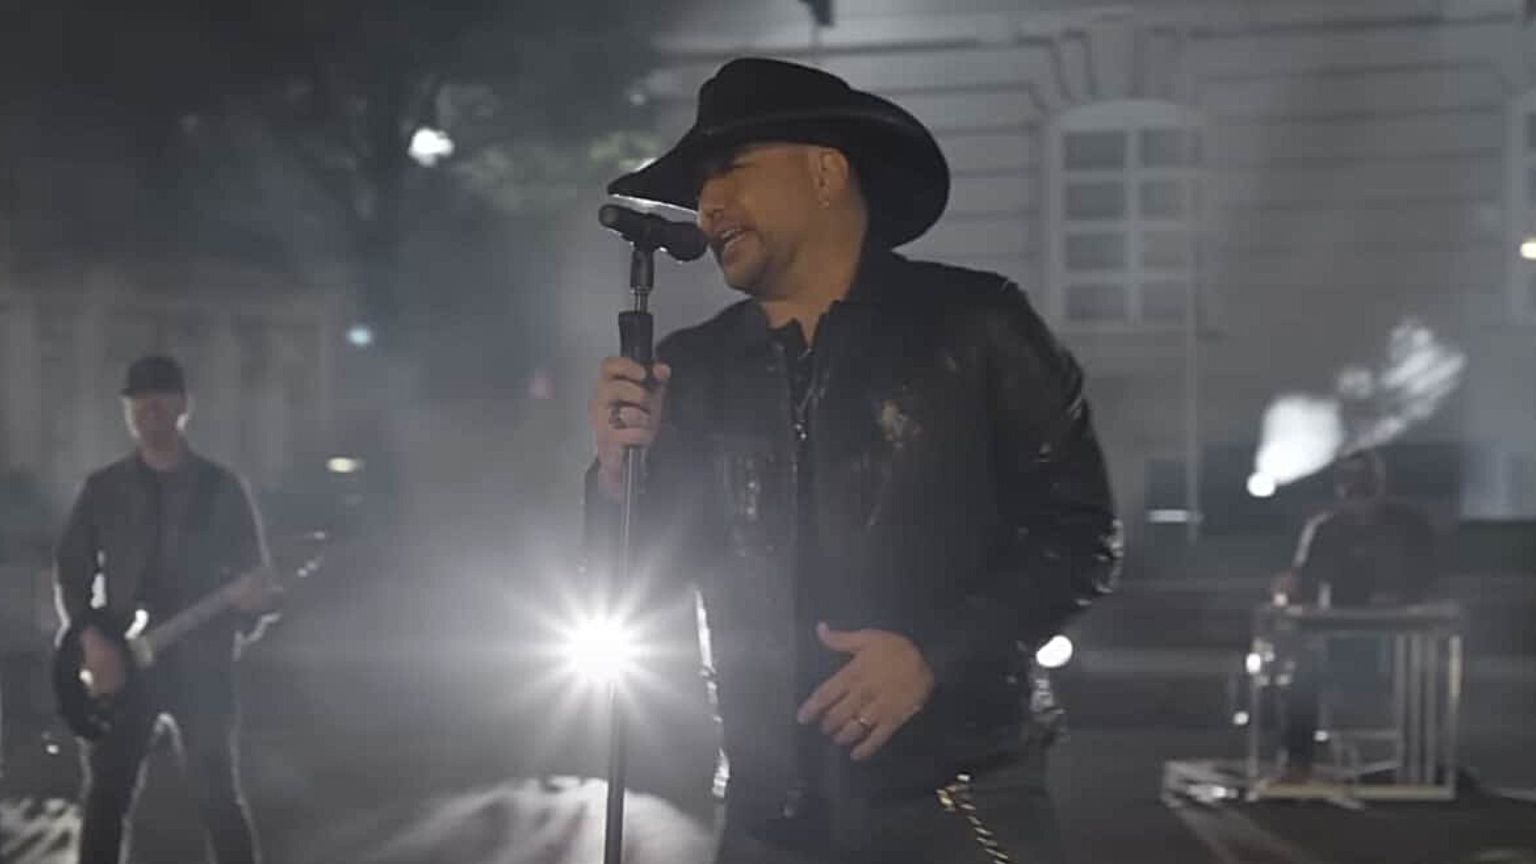 BLM Clips Are Removed From Jason Aldean Music Video After Online Backlash